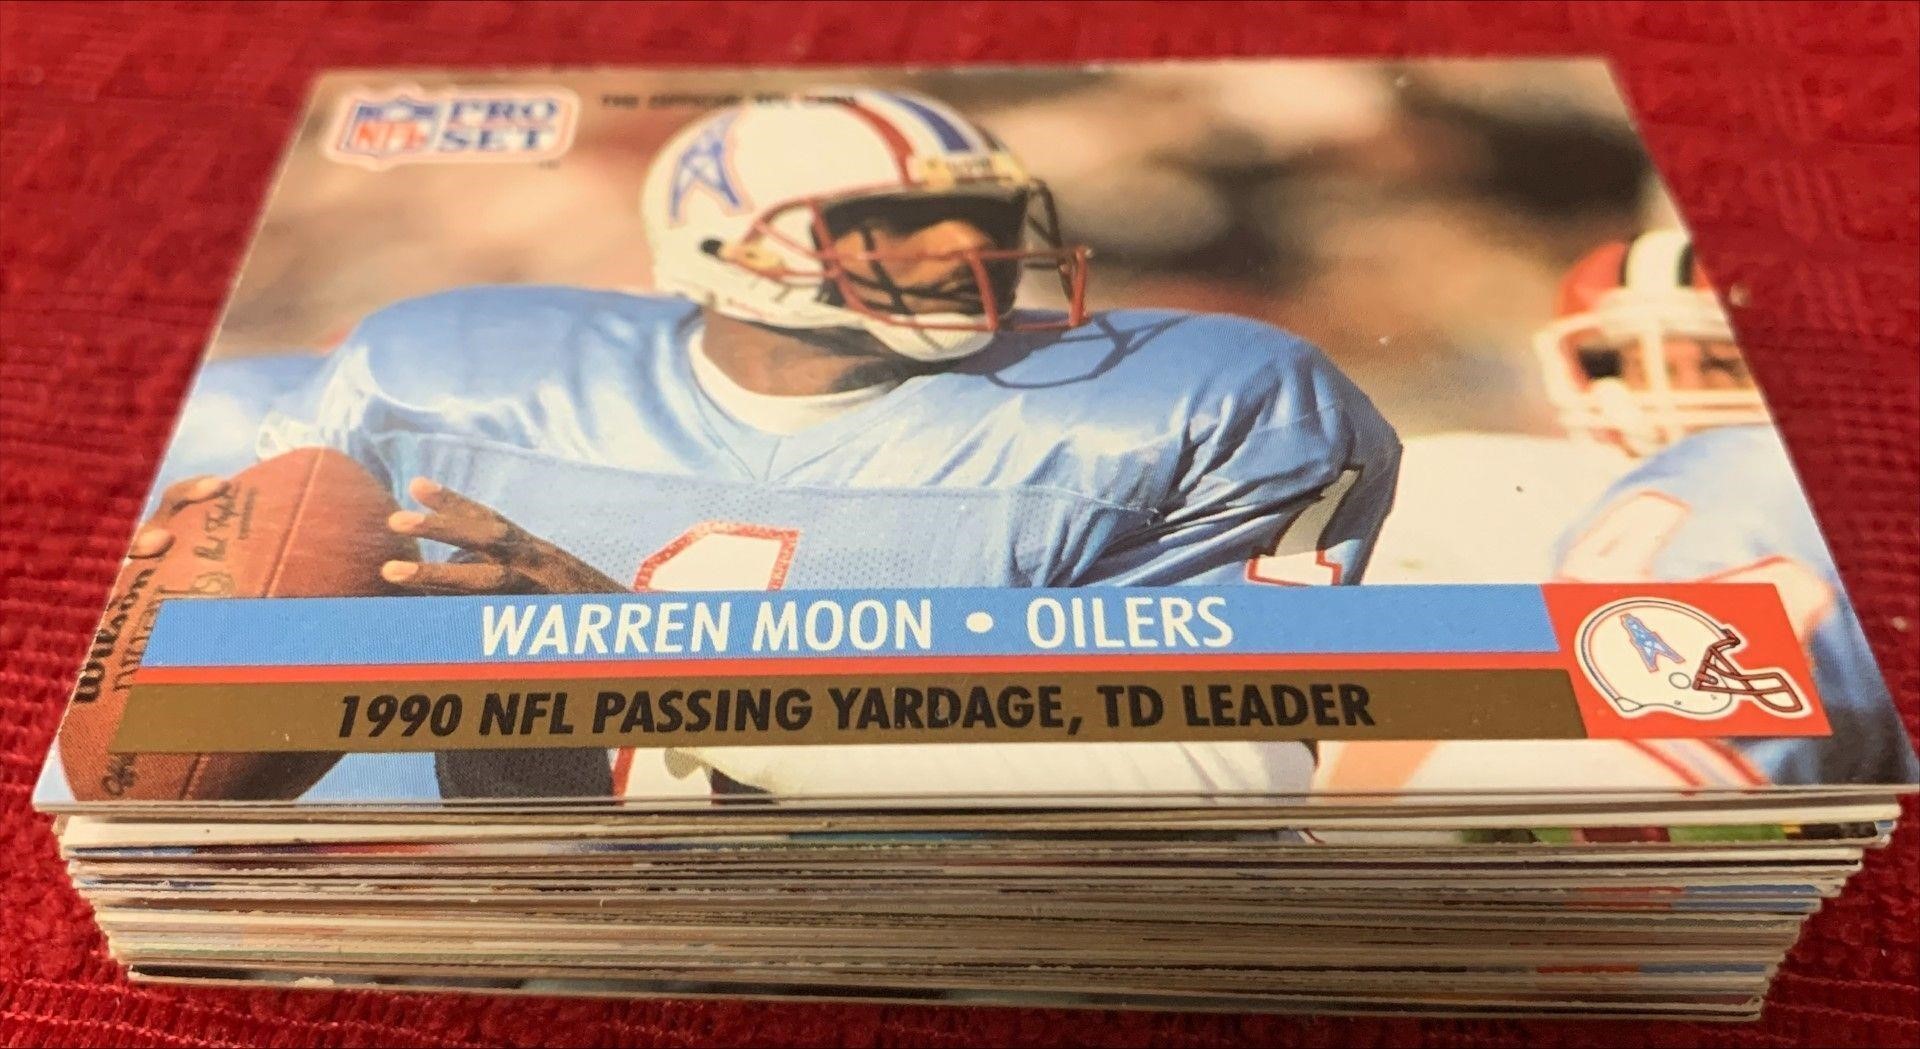 Houston Oilers cards